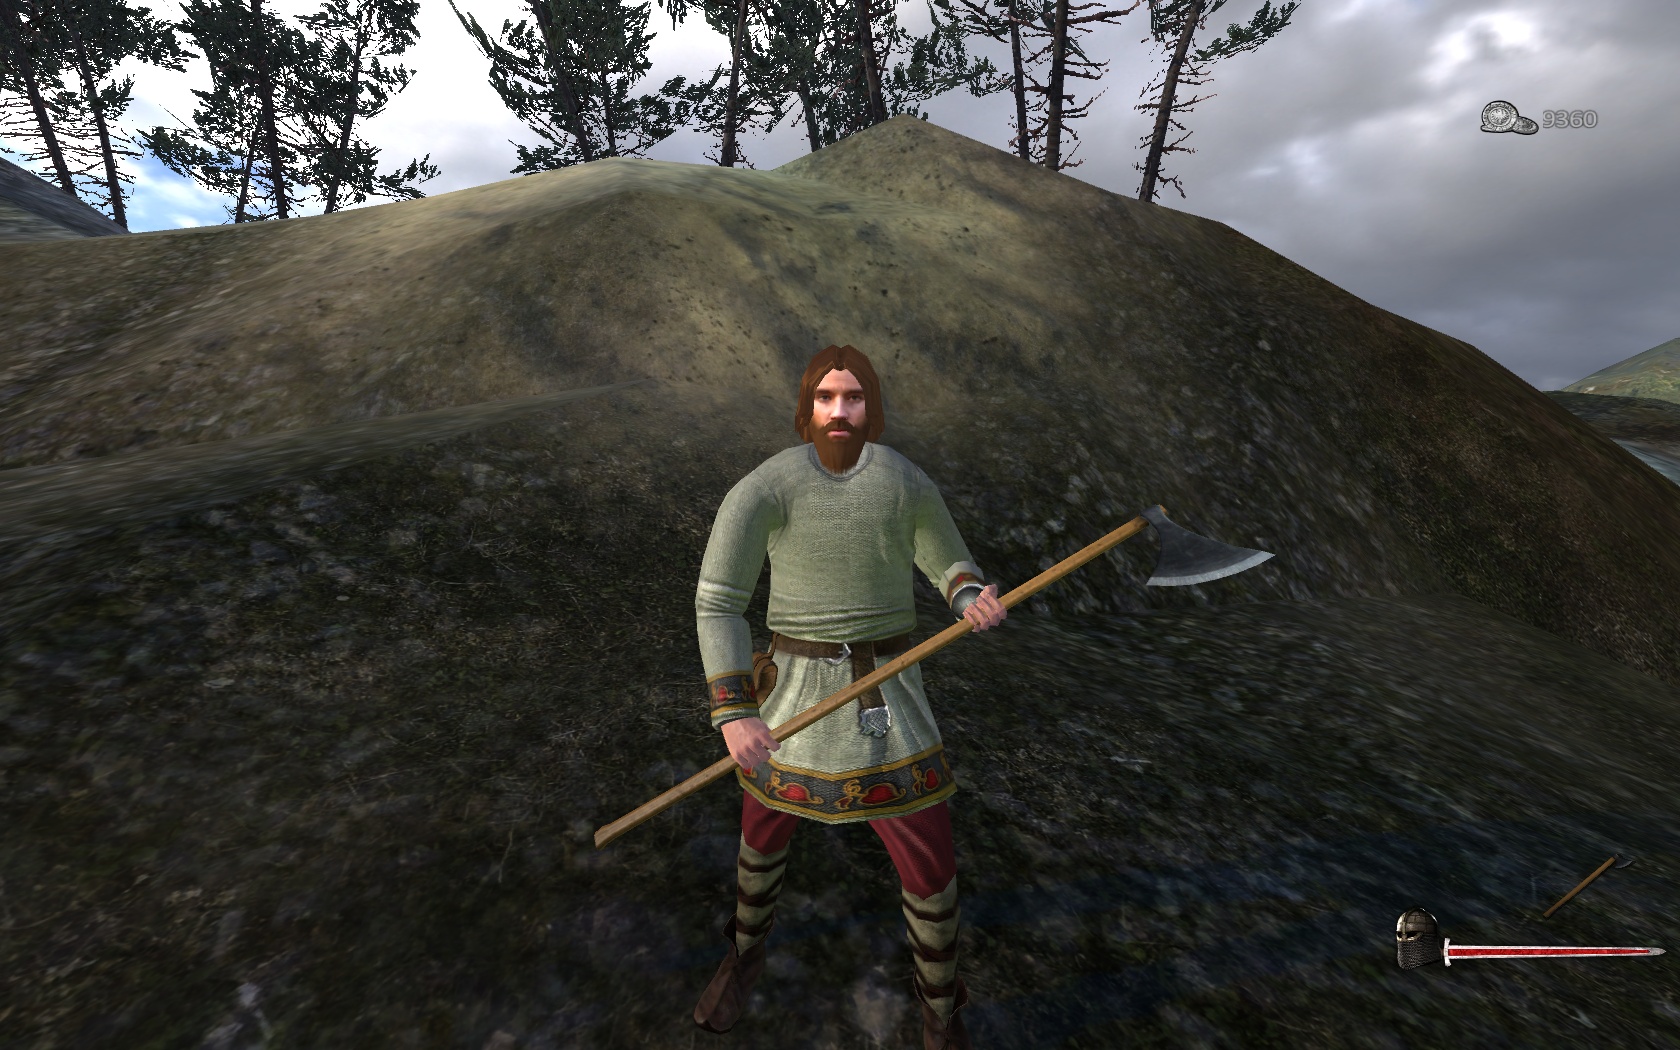 New content update for the Mount & Blade: Warband mod - Vikingr. 